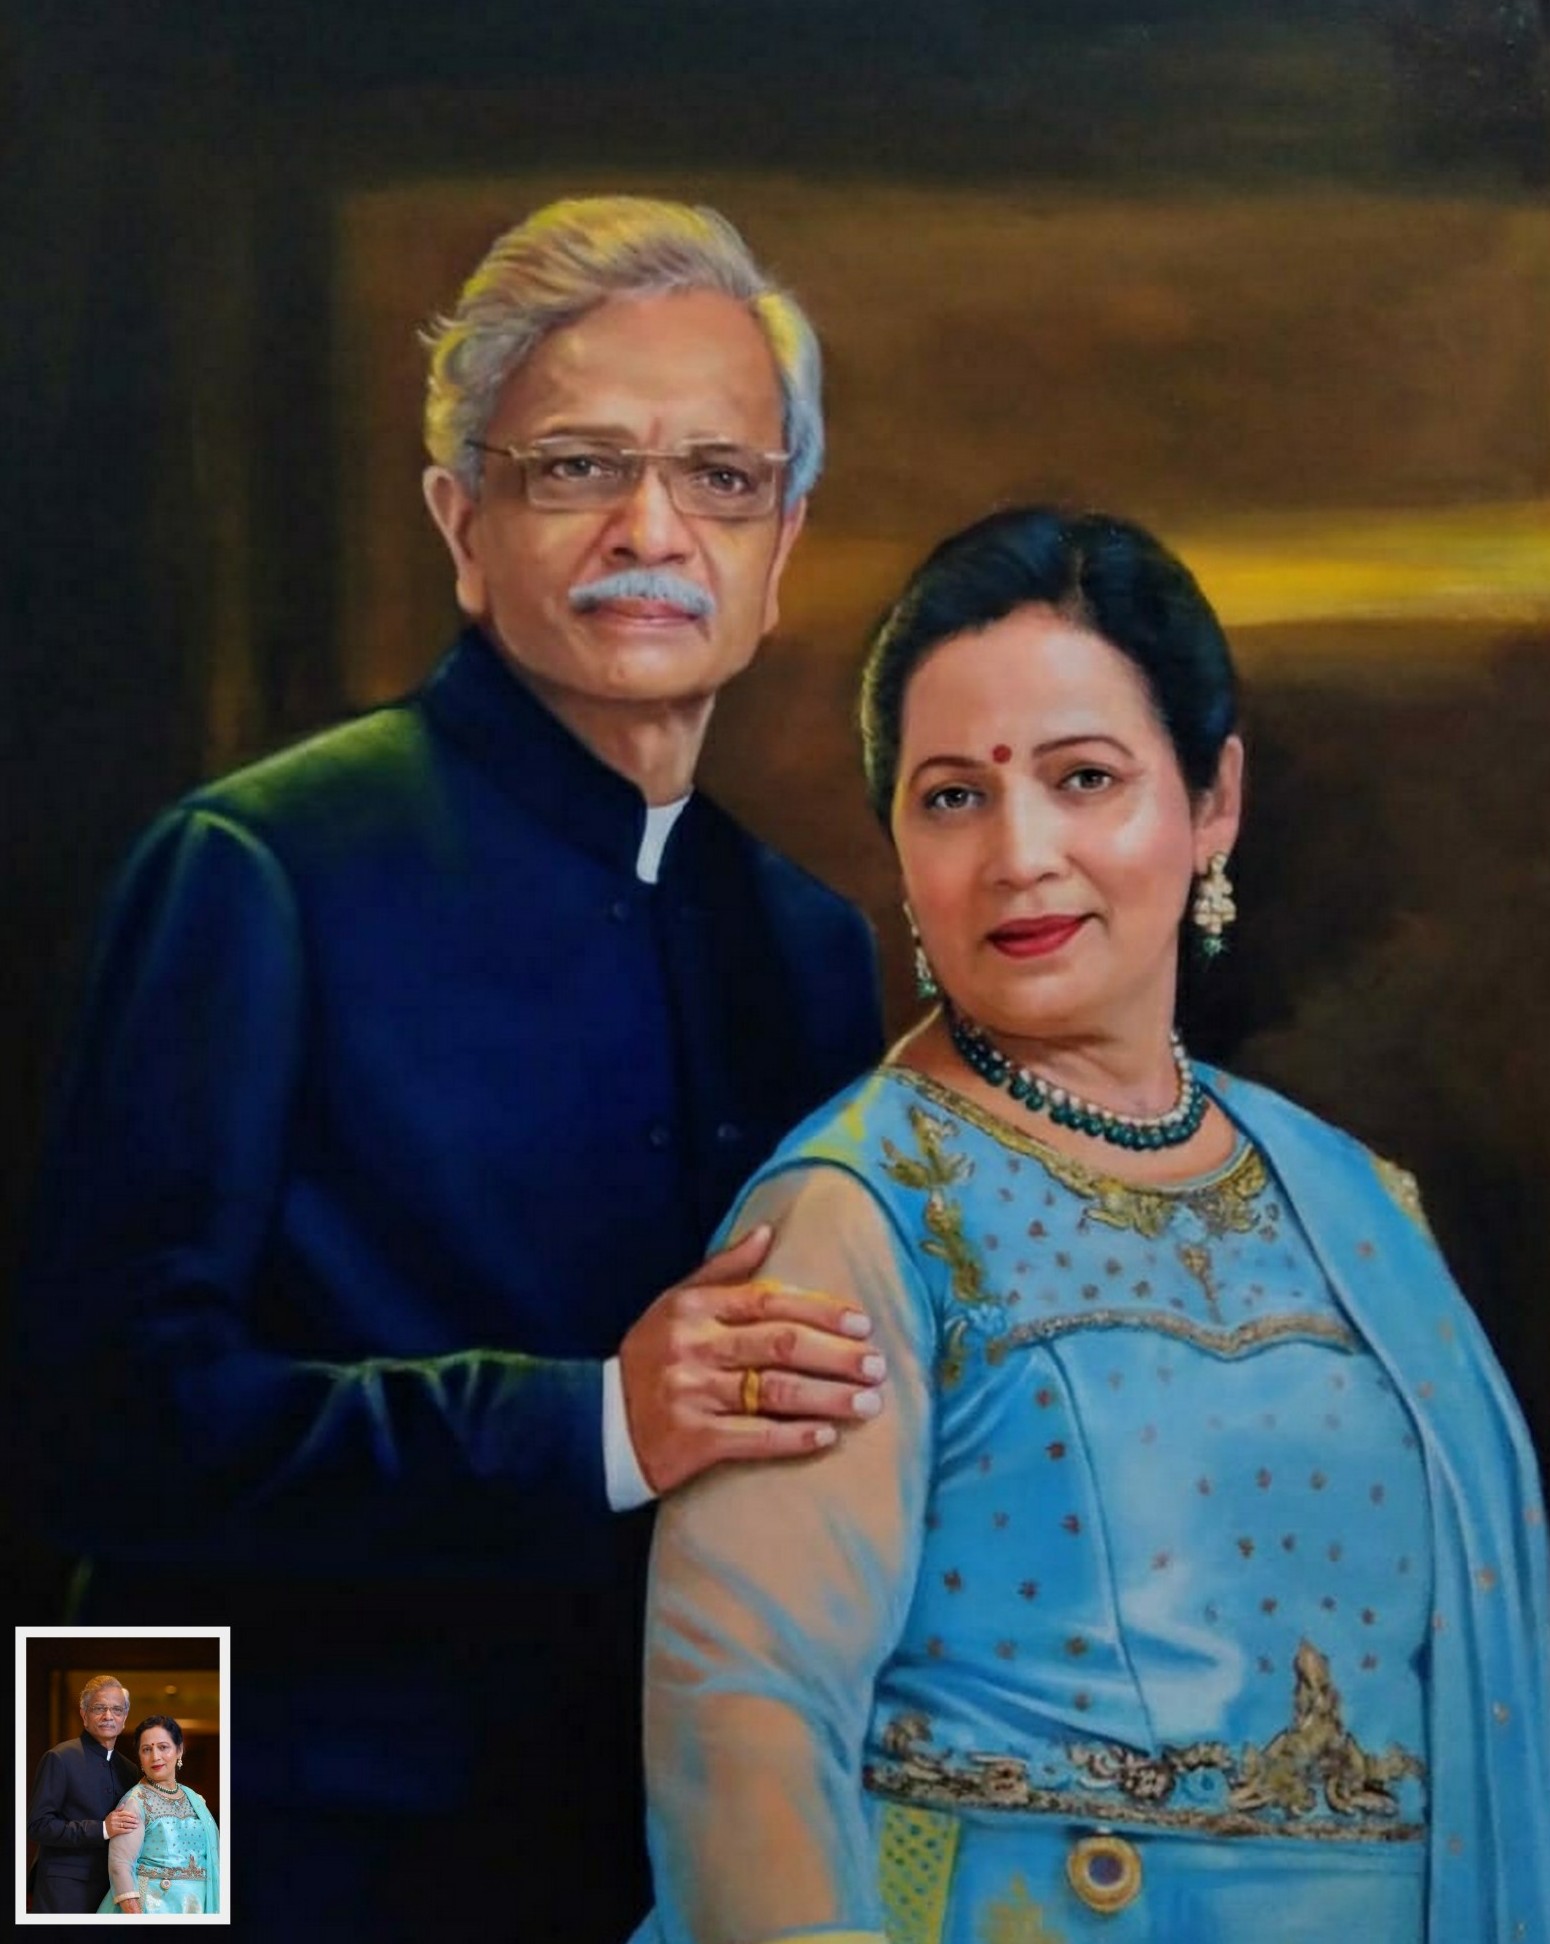 Anniverary painting gift, unique painting gift, anniversary painting, oil portrait painting